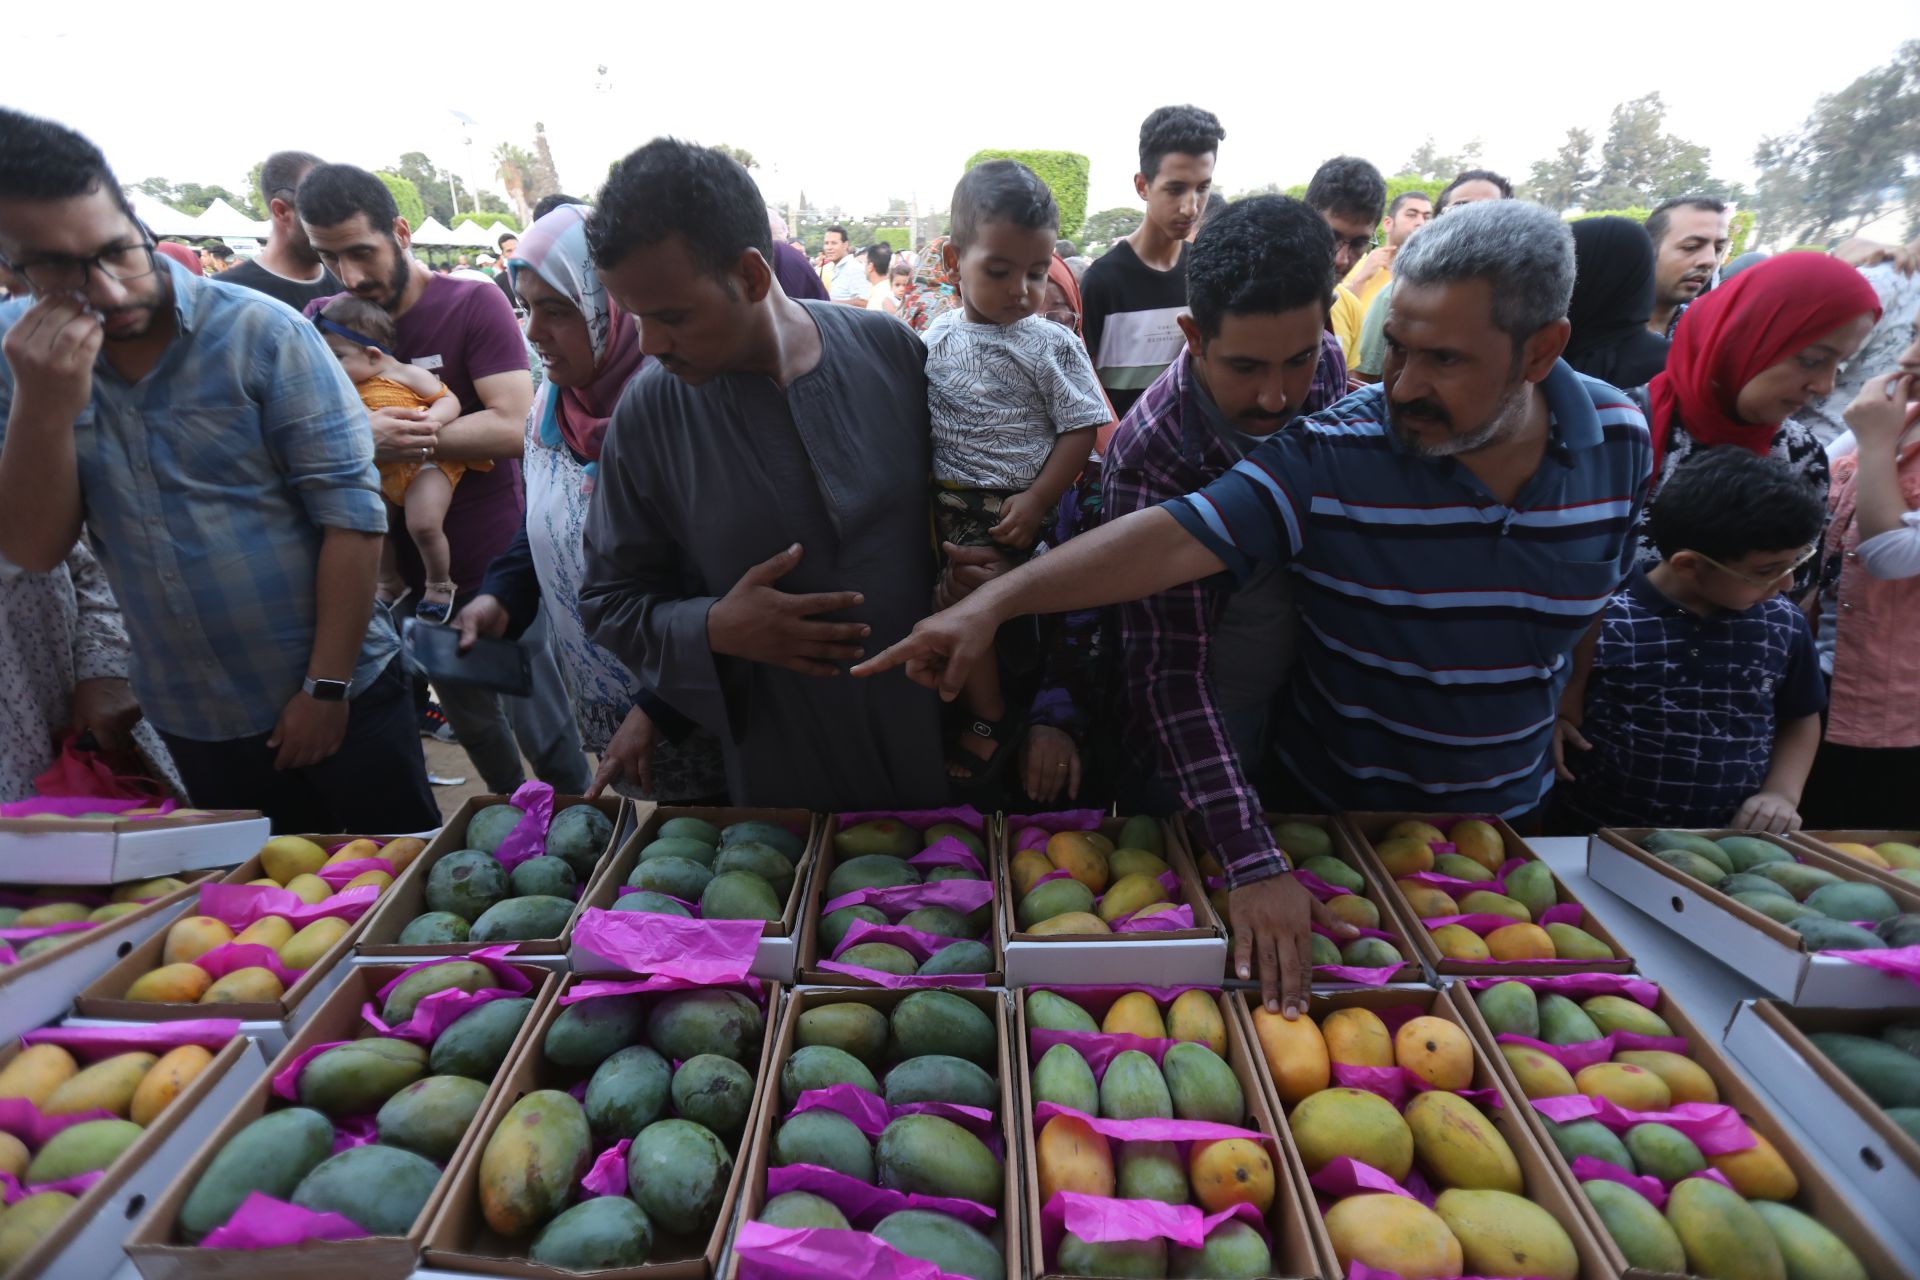 In Egypt, Society’s Well-Being Is Reflected in the Mangoes